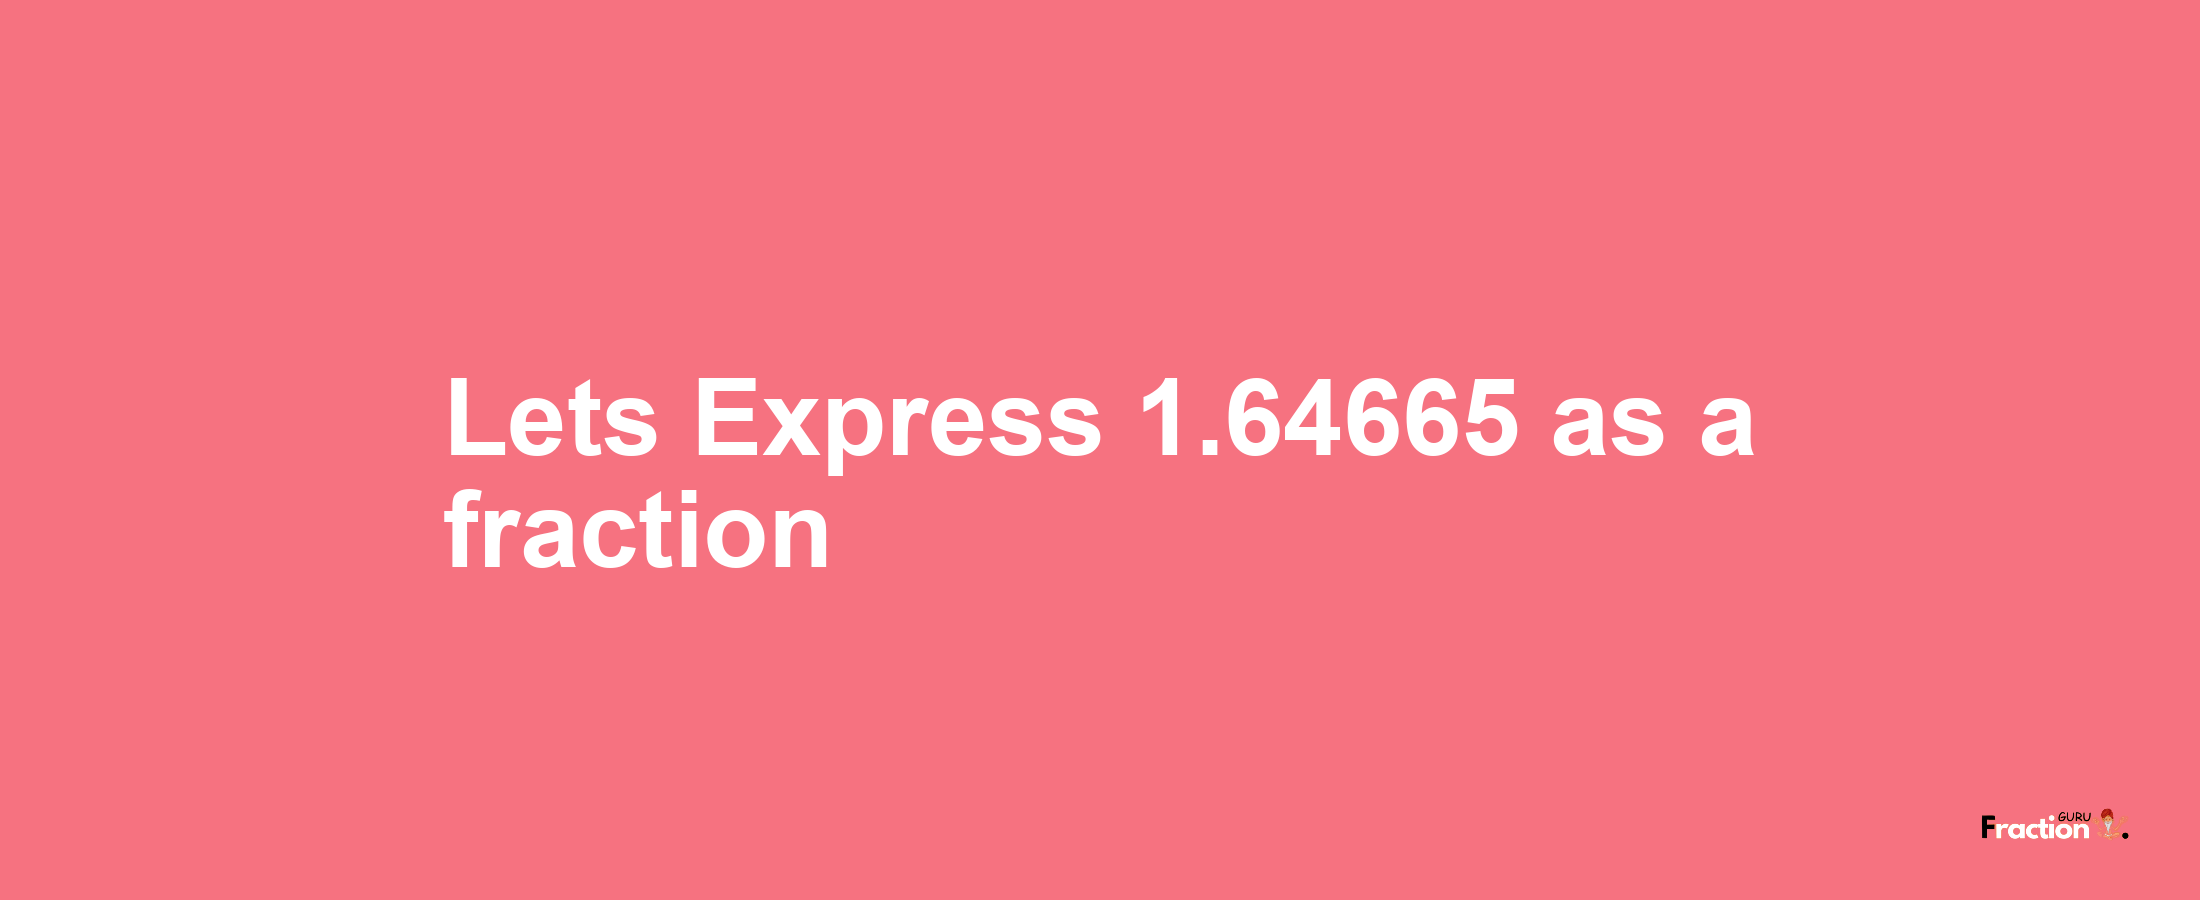 Lets Express 1.64665 as afraction